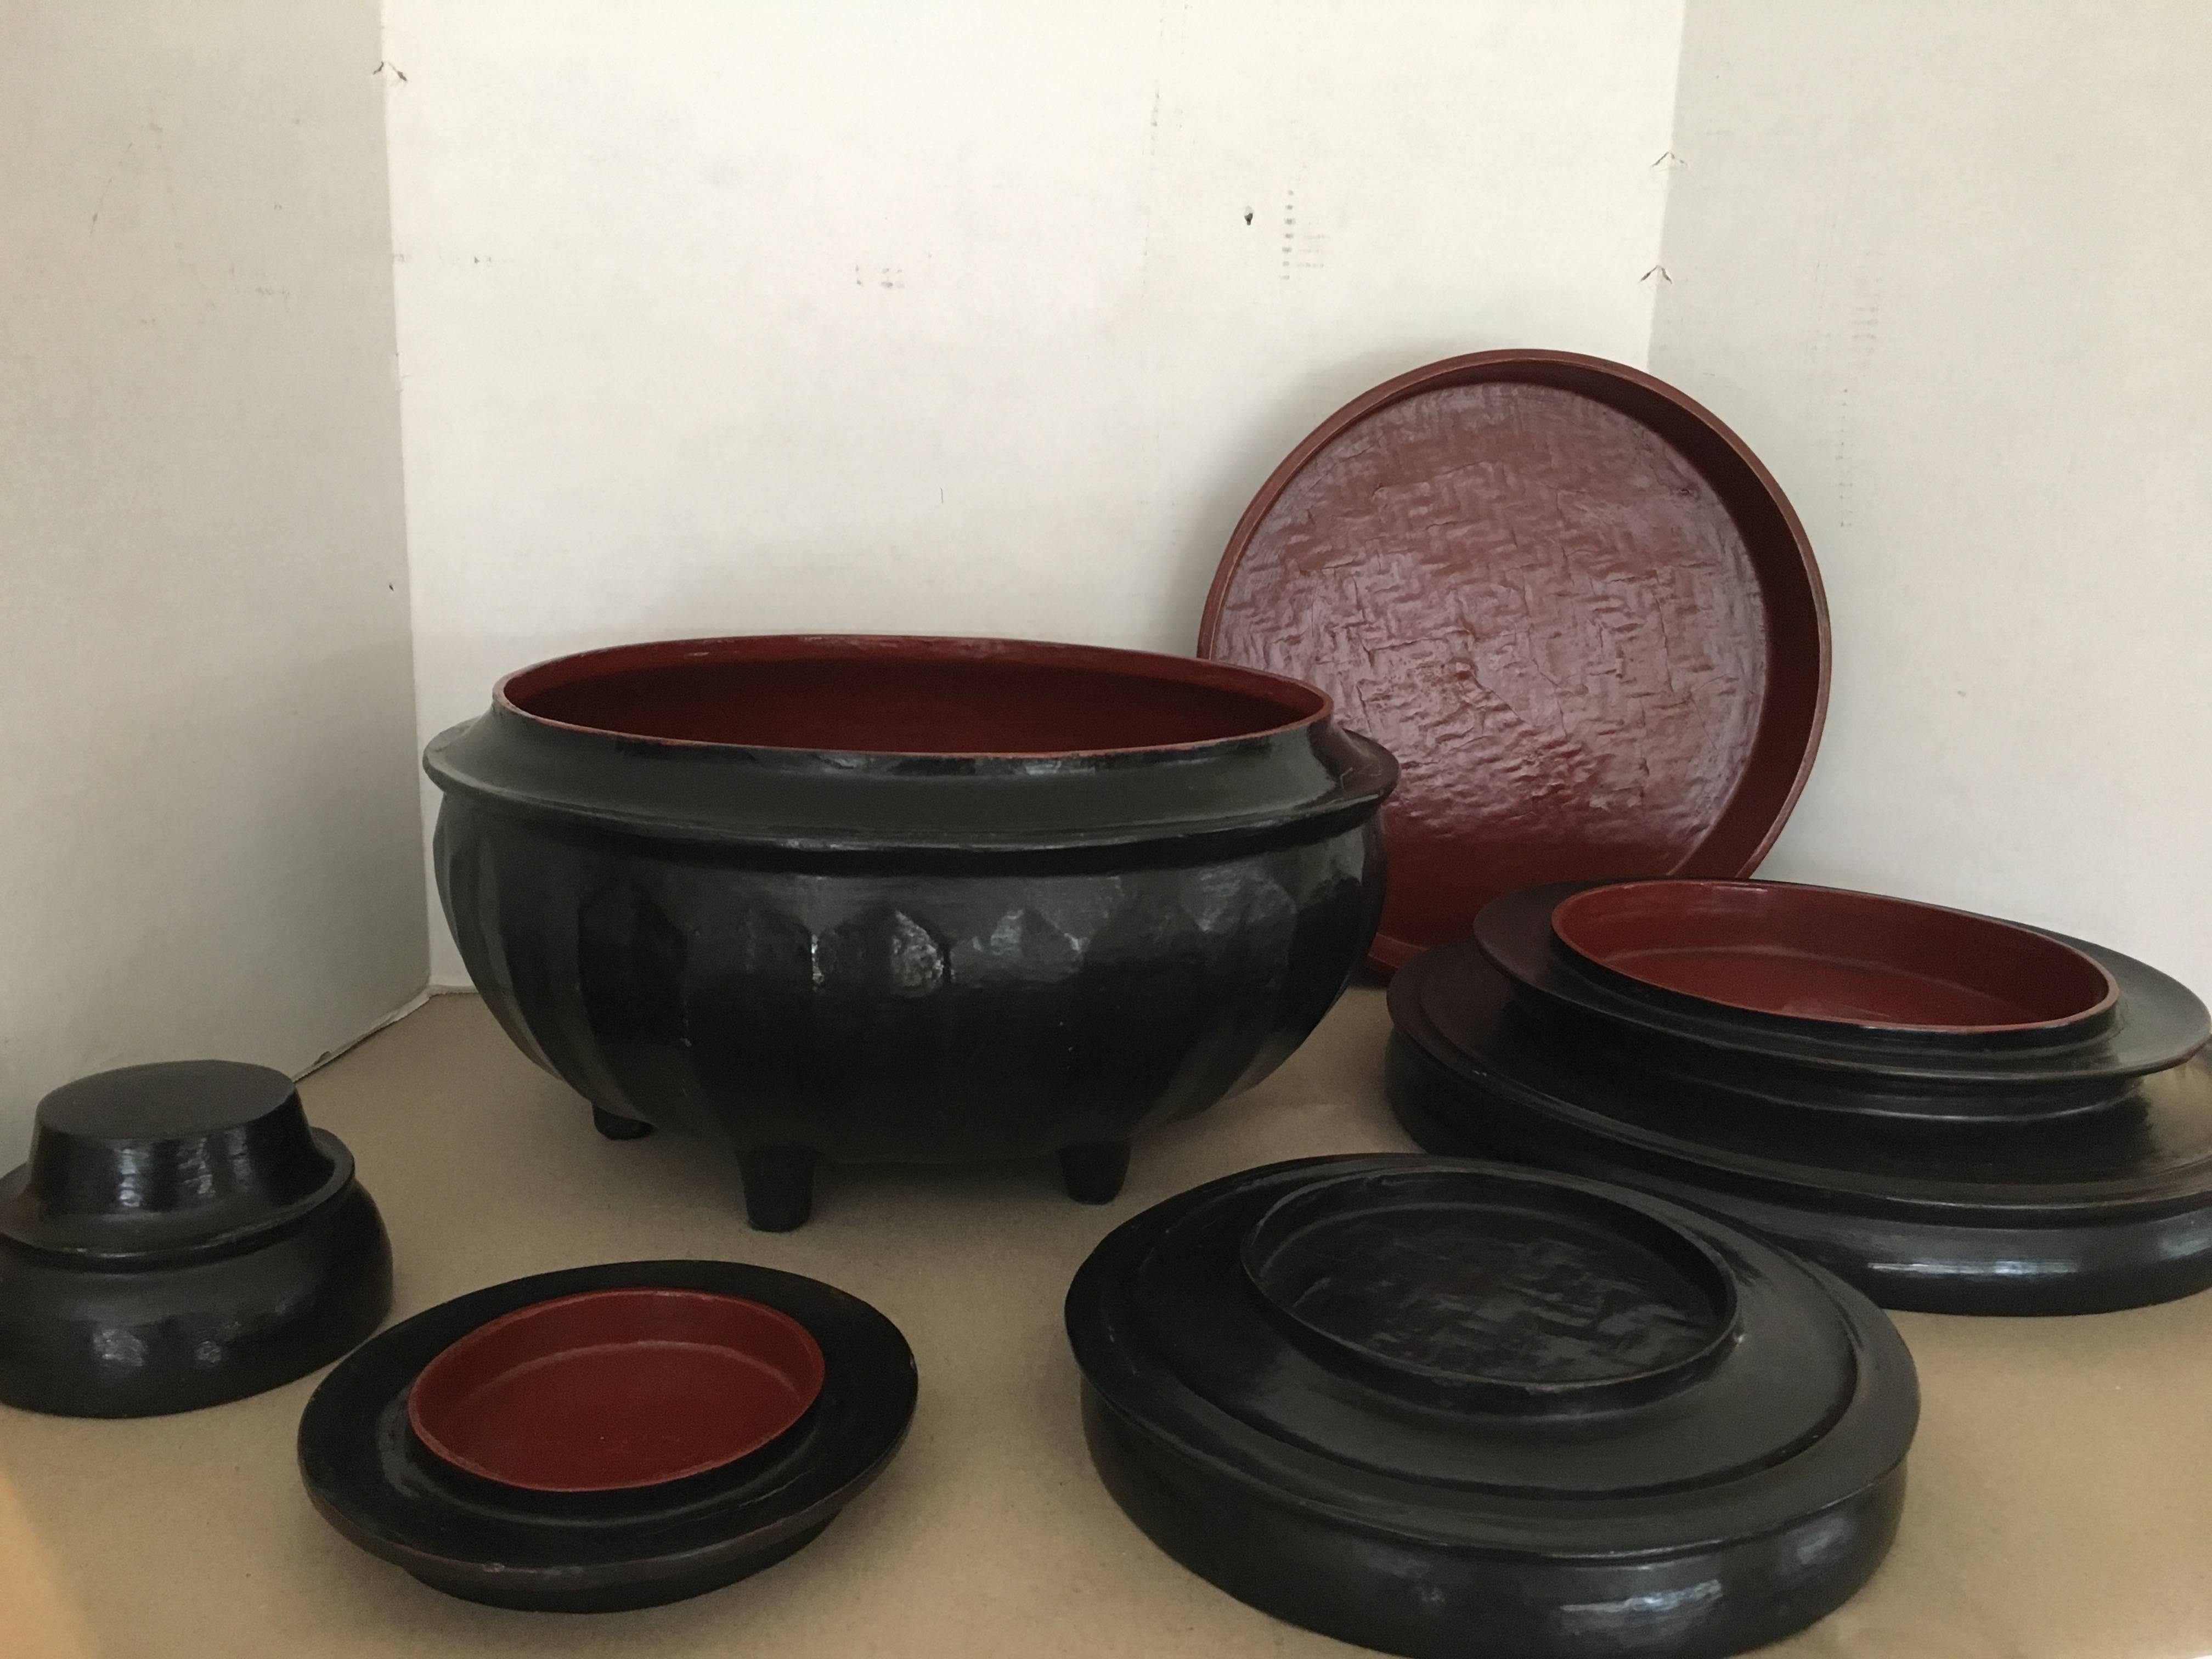 A Burmese black lacquered offering bowl called a Hsun Kwet. Used to present offerings of food at Buddhist monasteries. There are three bowls, two trays and a lid the inside is a cinnabar color.